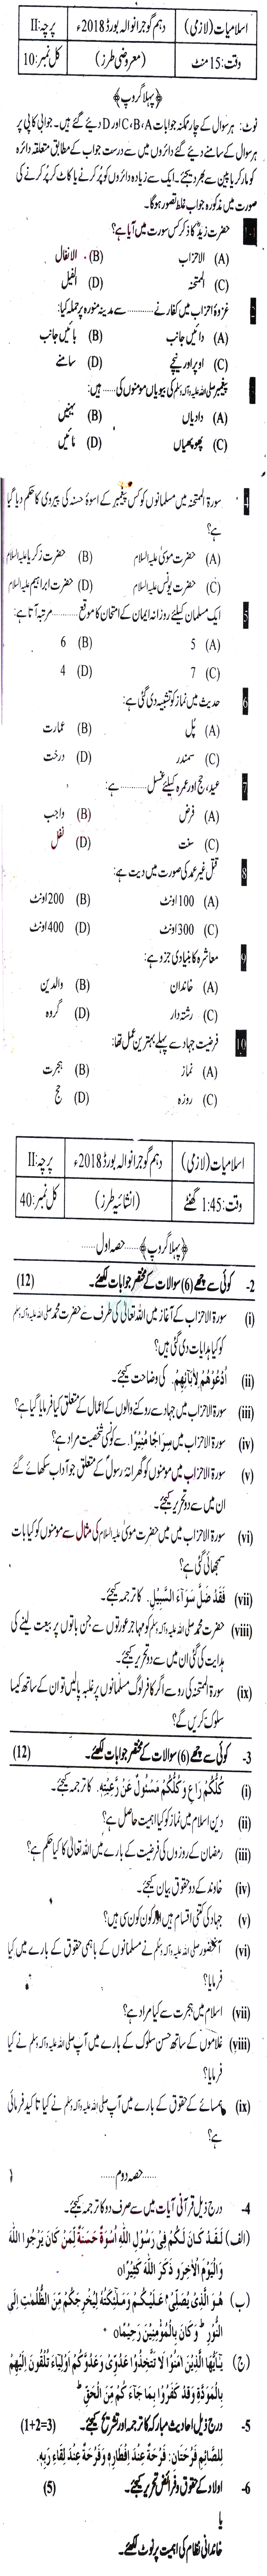 Islamiat (Compulsory) 10th class Past Paper Group 1 BISE Gujranwala 2018